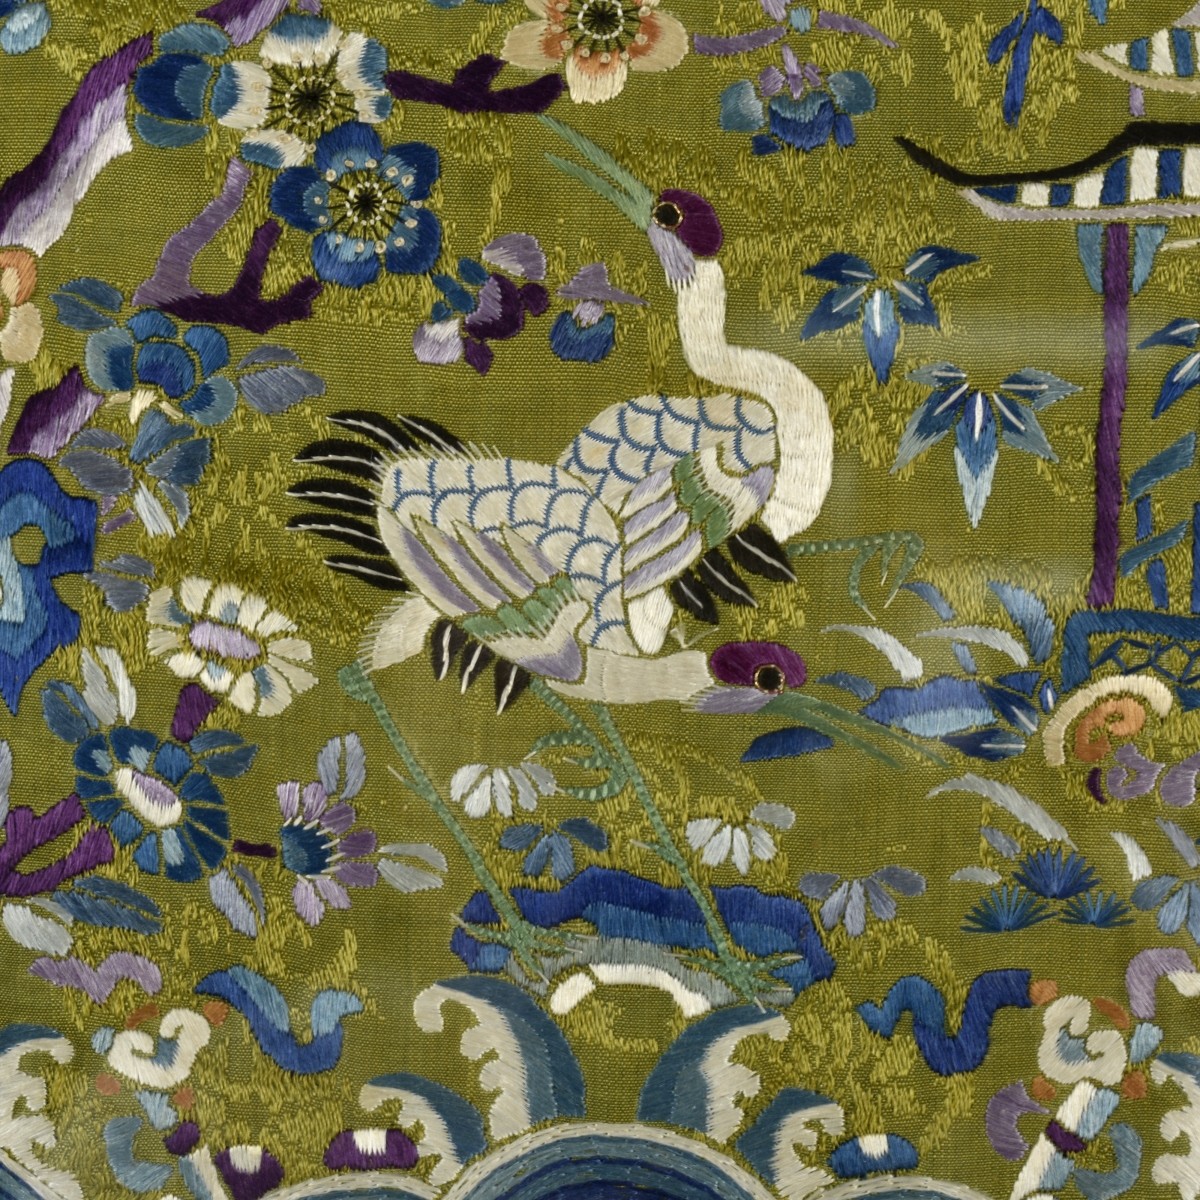 Antique Chinese Silk Embroidered Panel